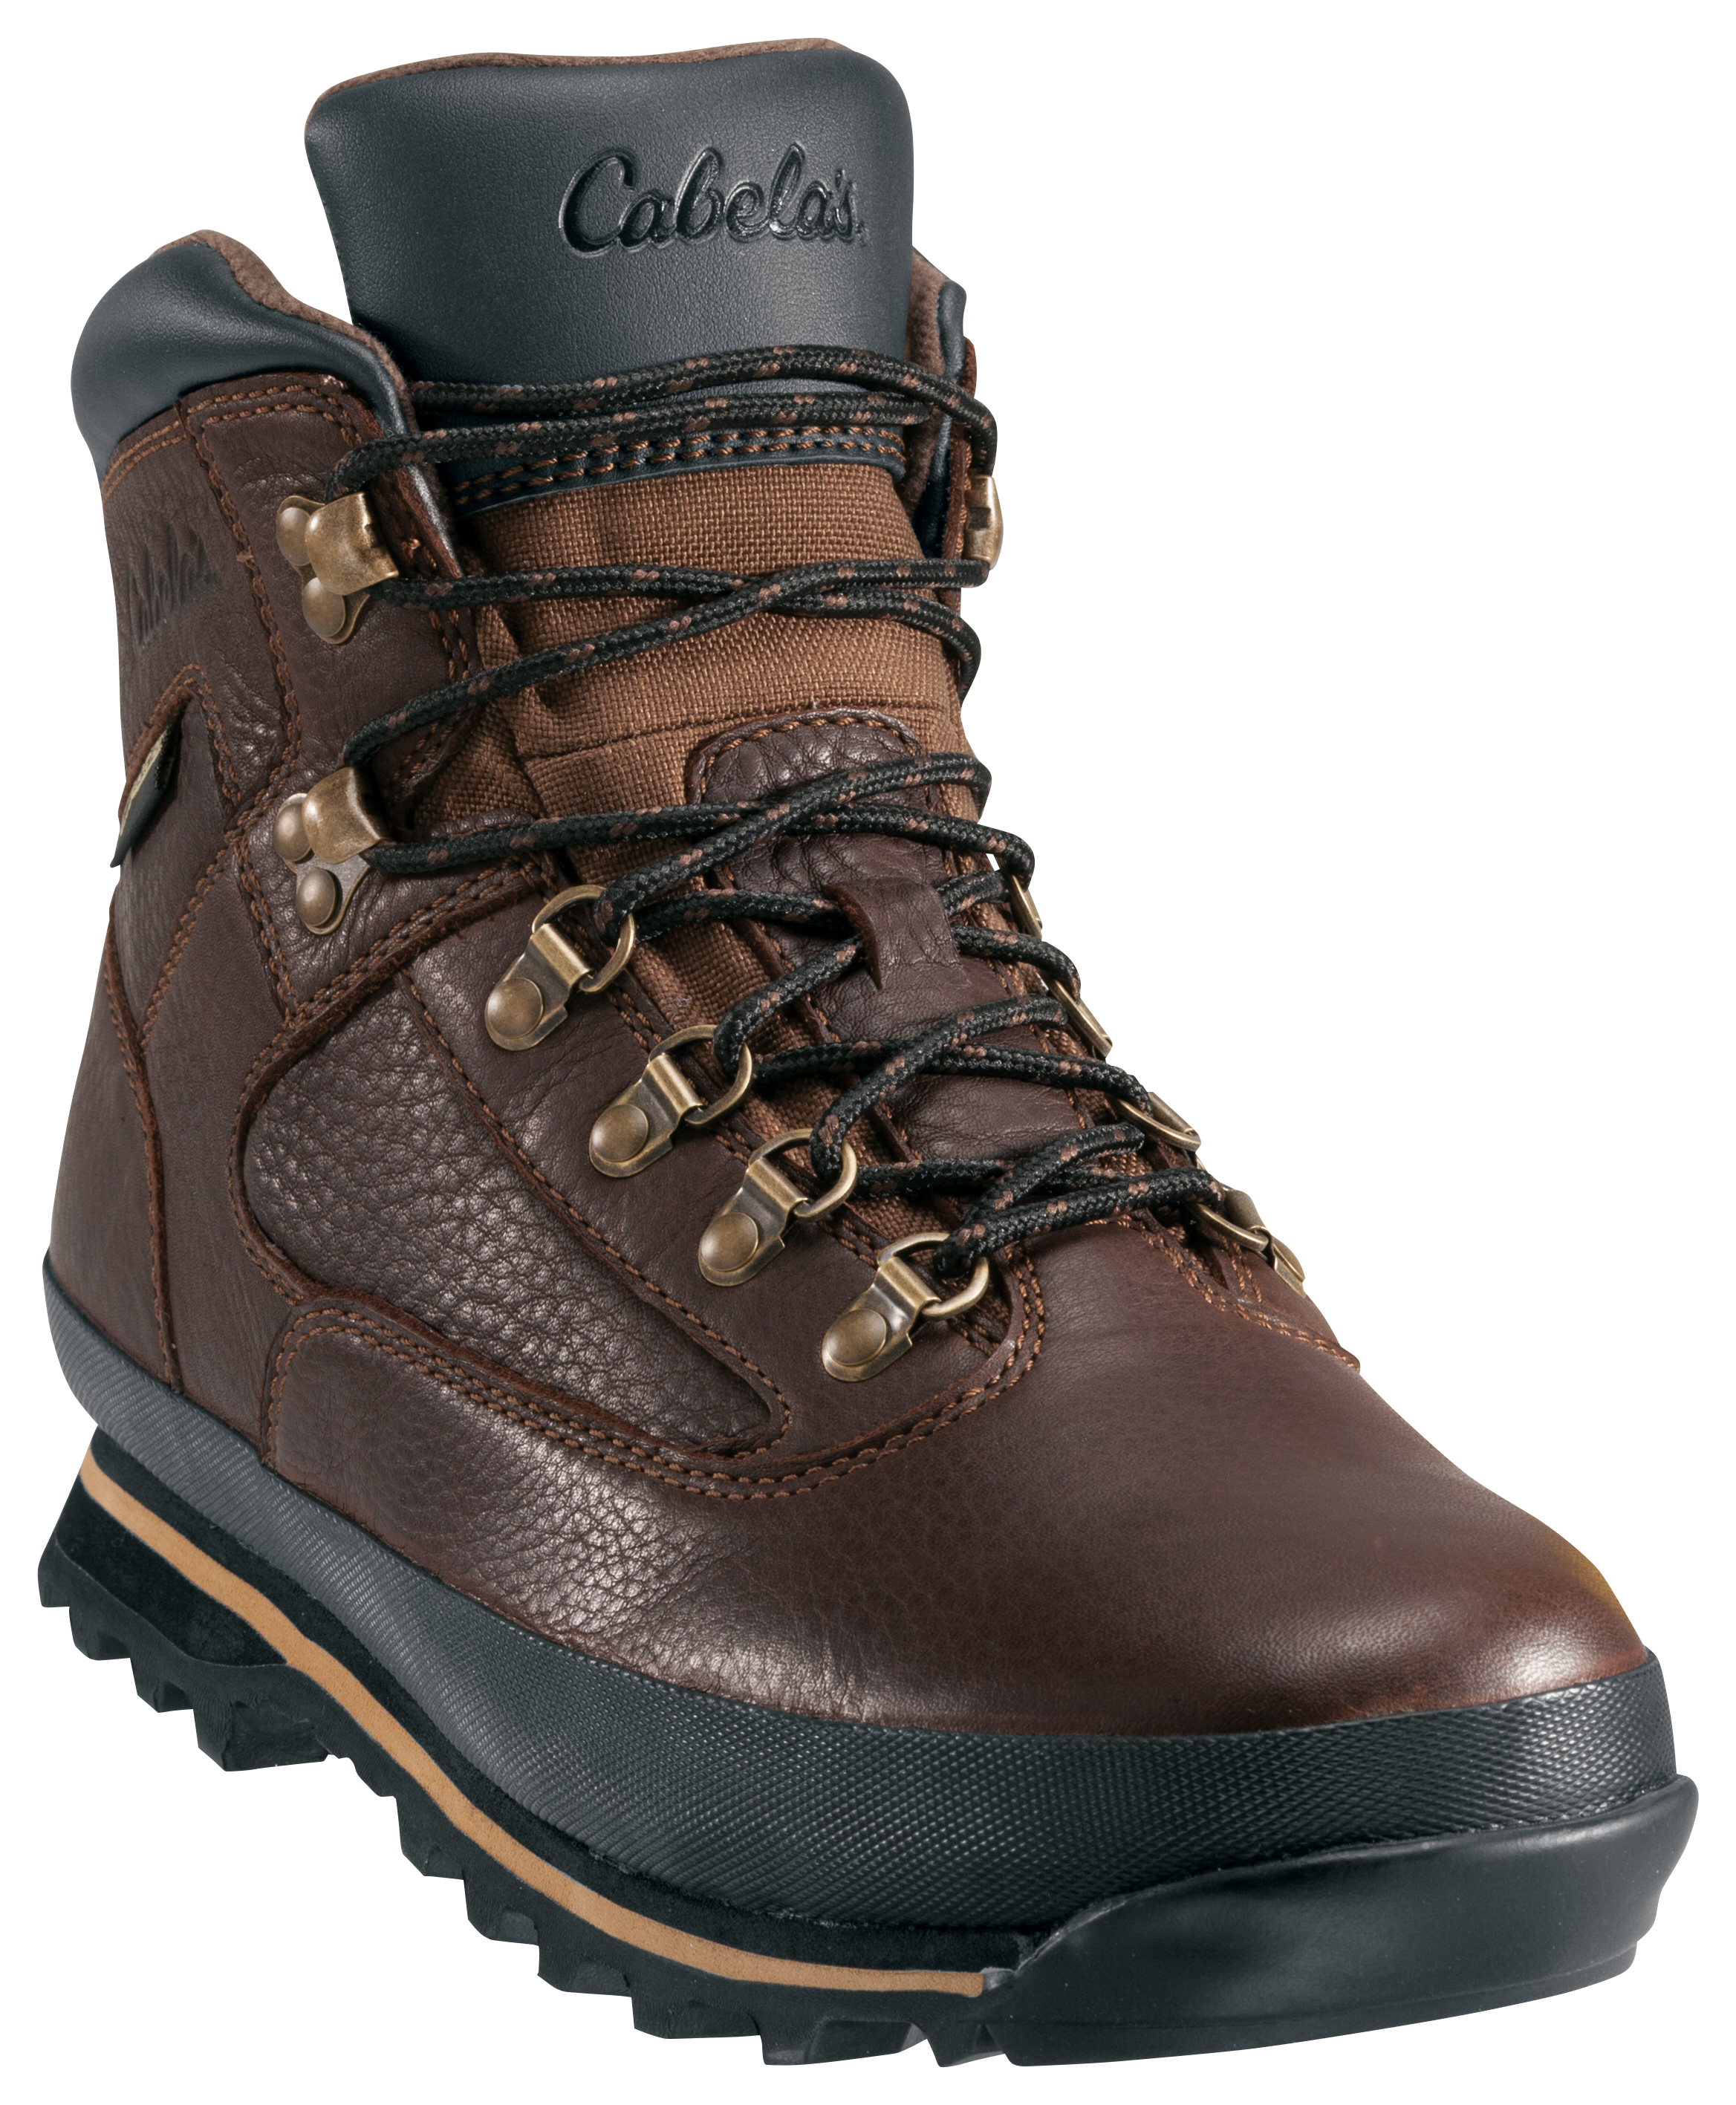 Cabela's Rimrock Mid GORE-TEX Hiking Boots for Men - Brown - 10.5W